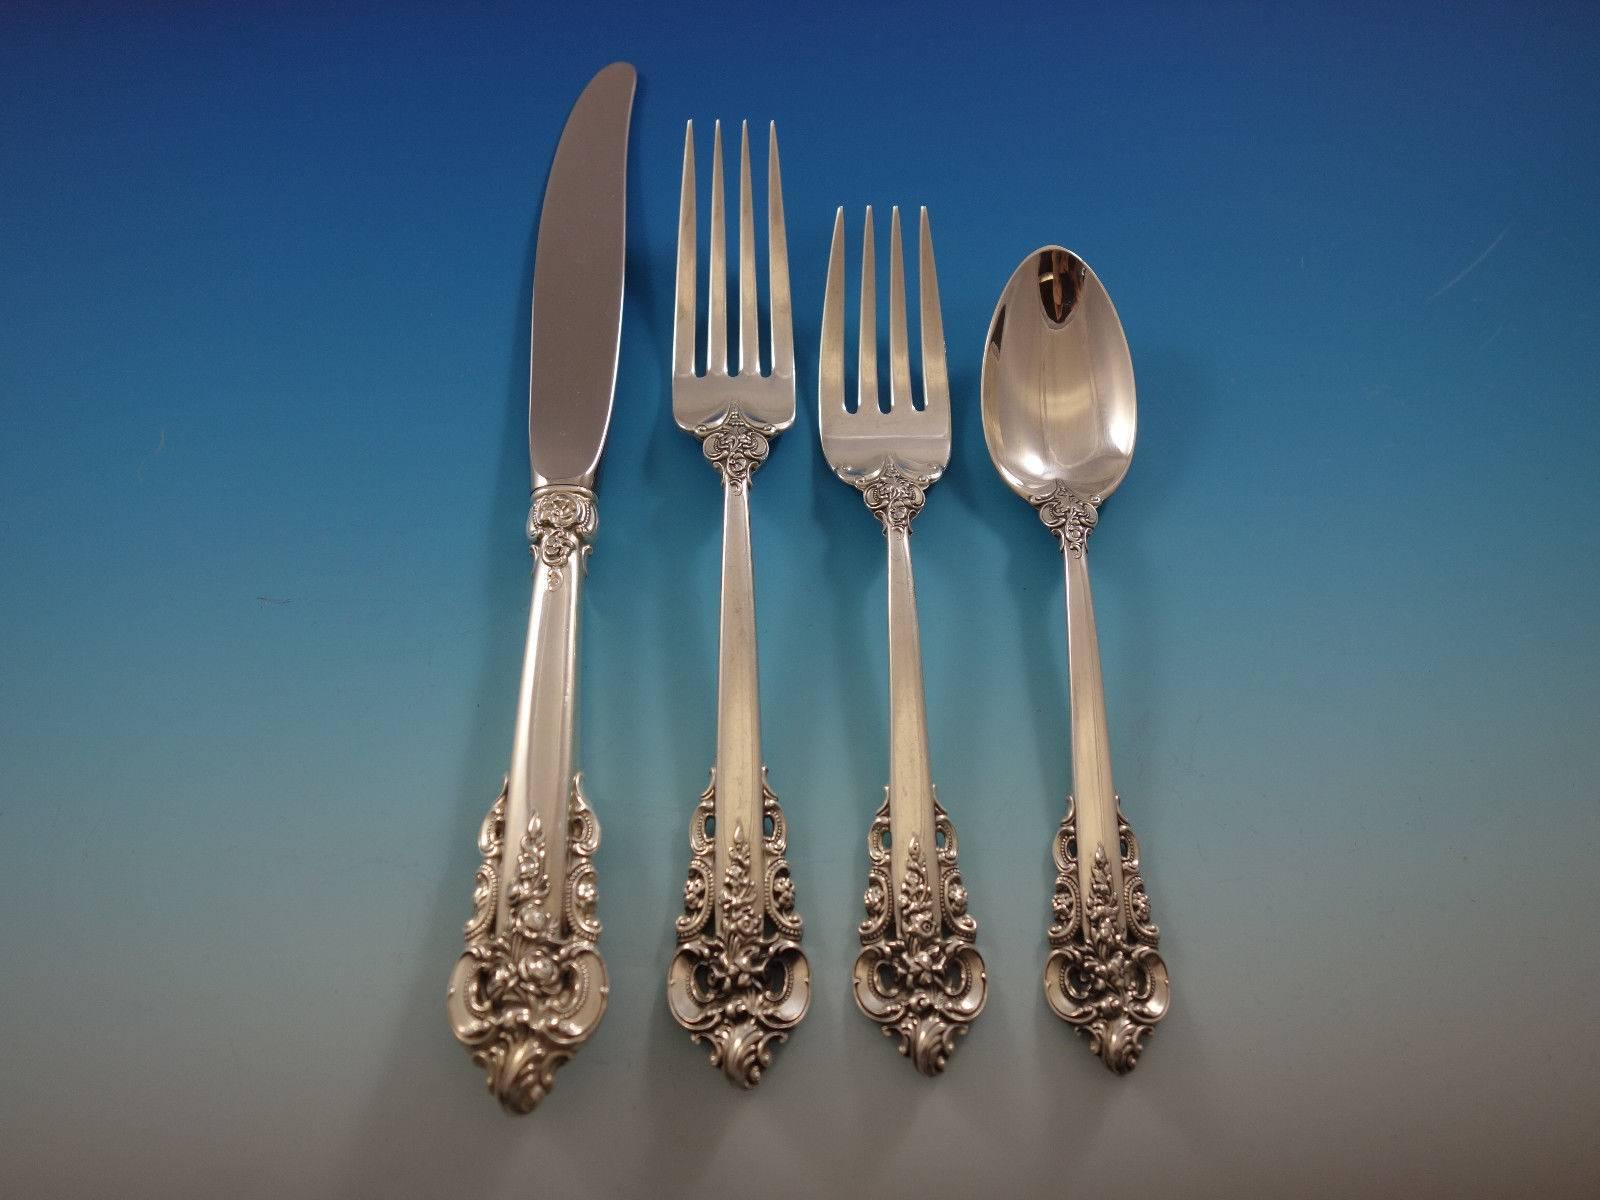 Massive Grande baroque by Wallace sterling silver flatware set for 48 - 303 pieces. This set includes: 

48 knives, 8 7/8